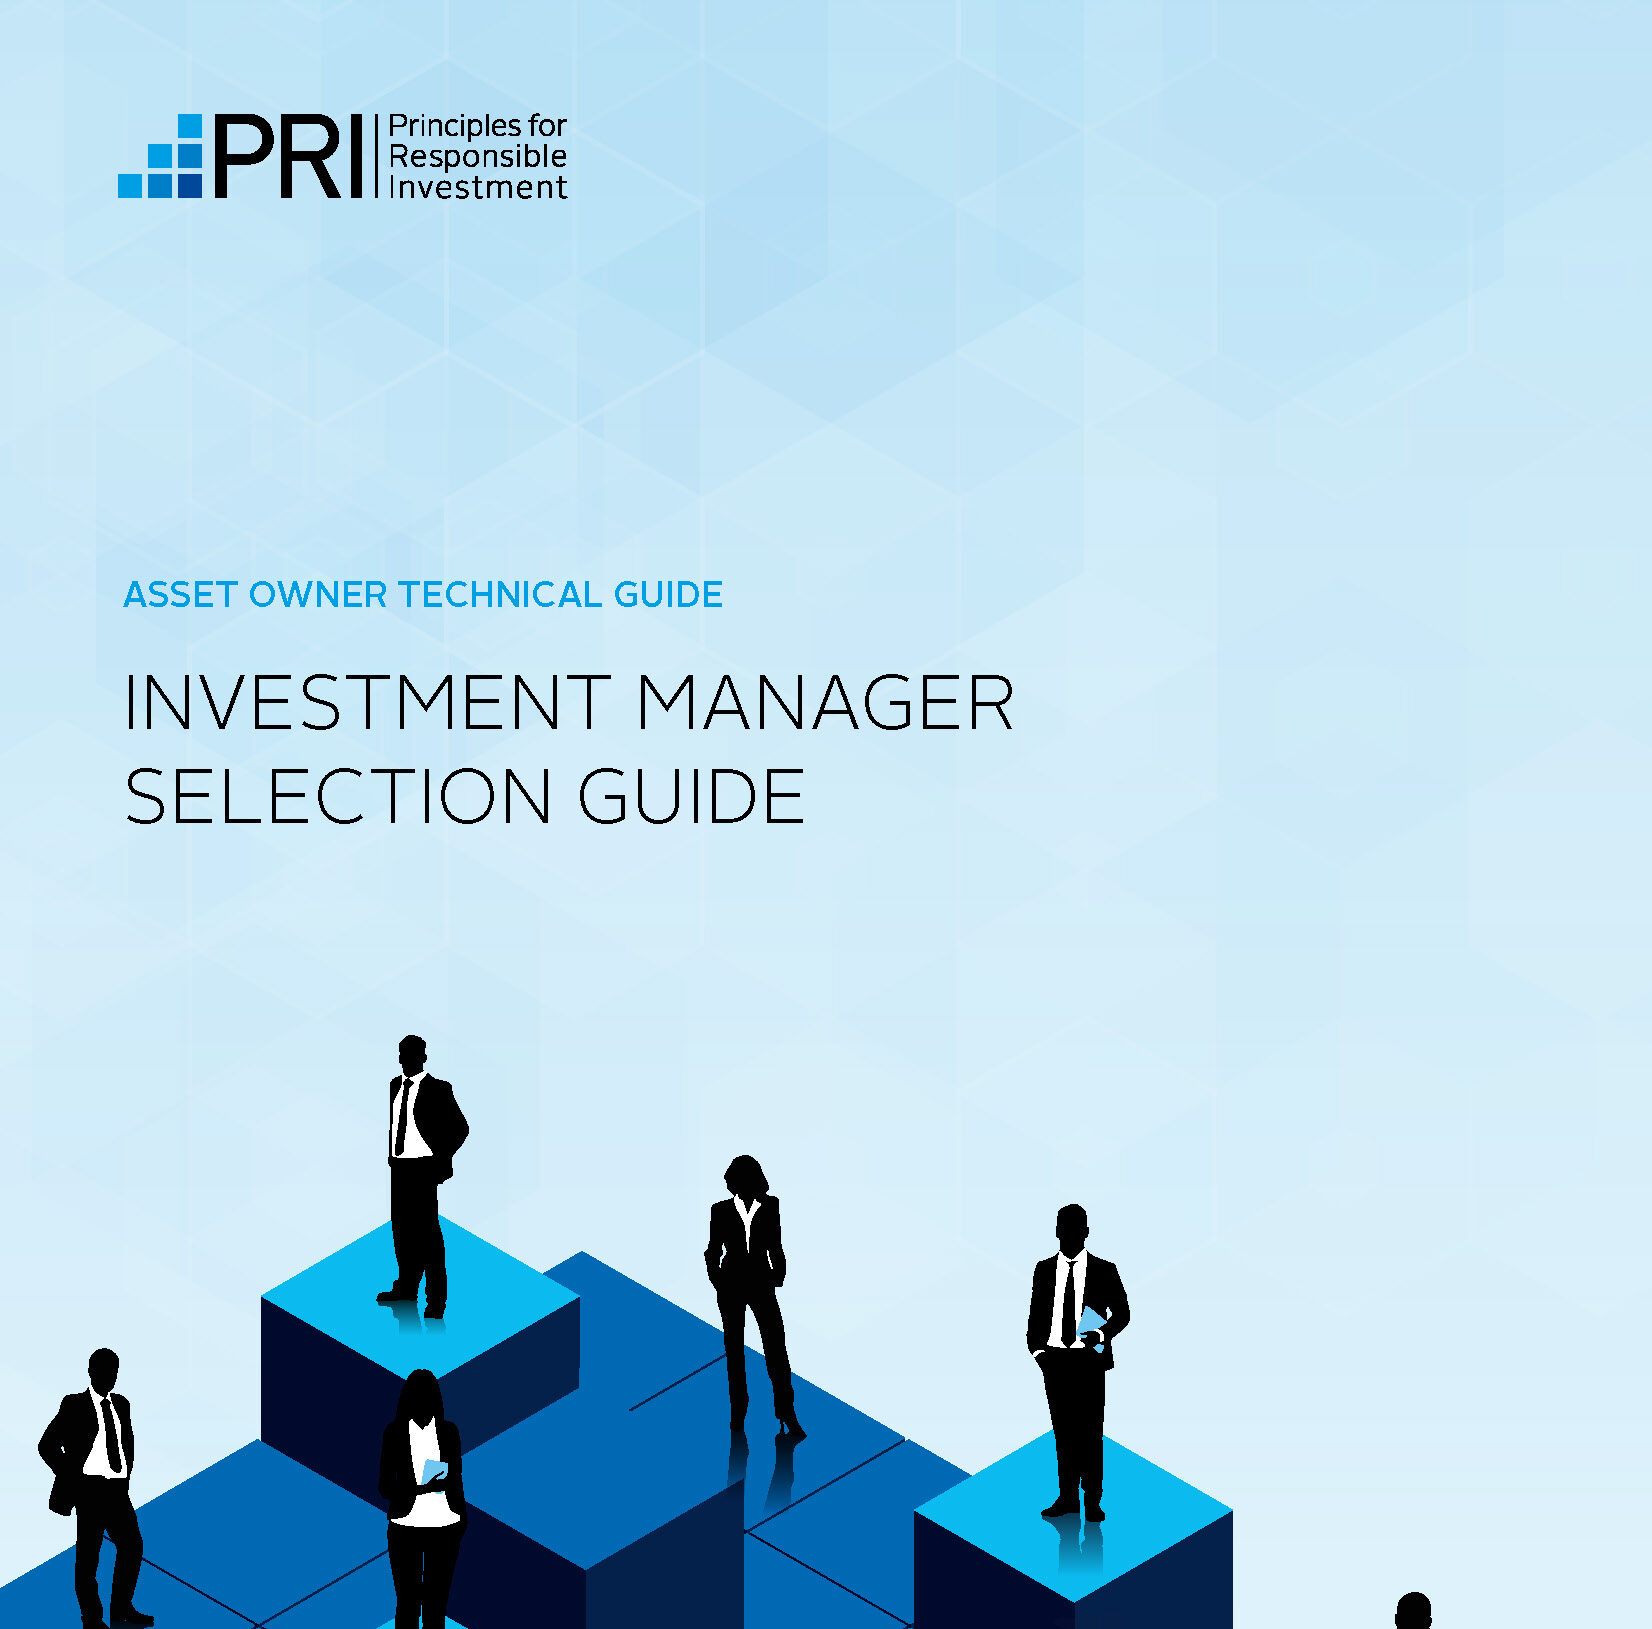 Principles for Responsible Investment - Asset Owner Technical Guide - Investment Manager Selection Guide